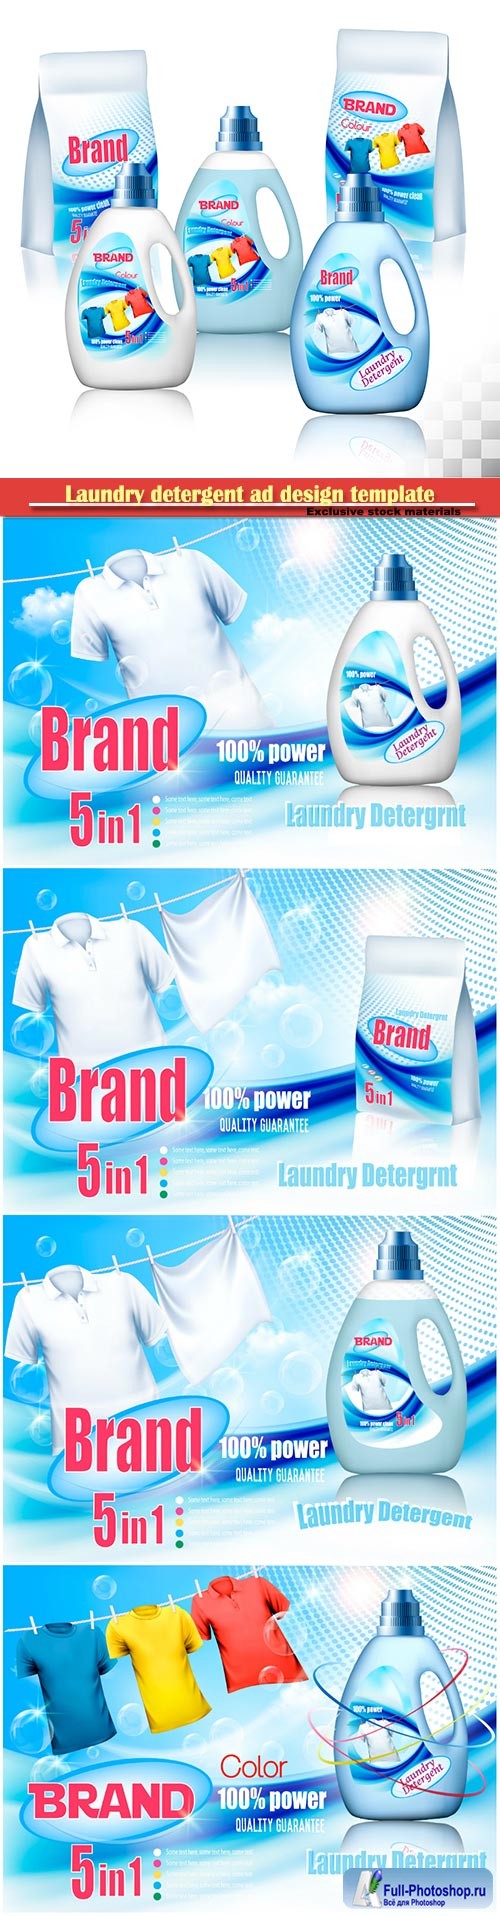 Laundry detergent ad design template, plastic bottle and colorful shirts on rope